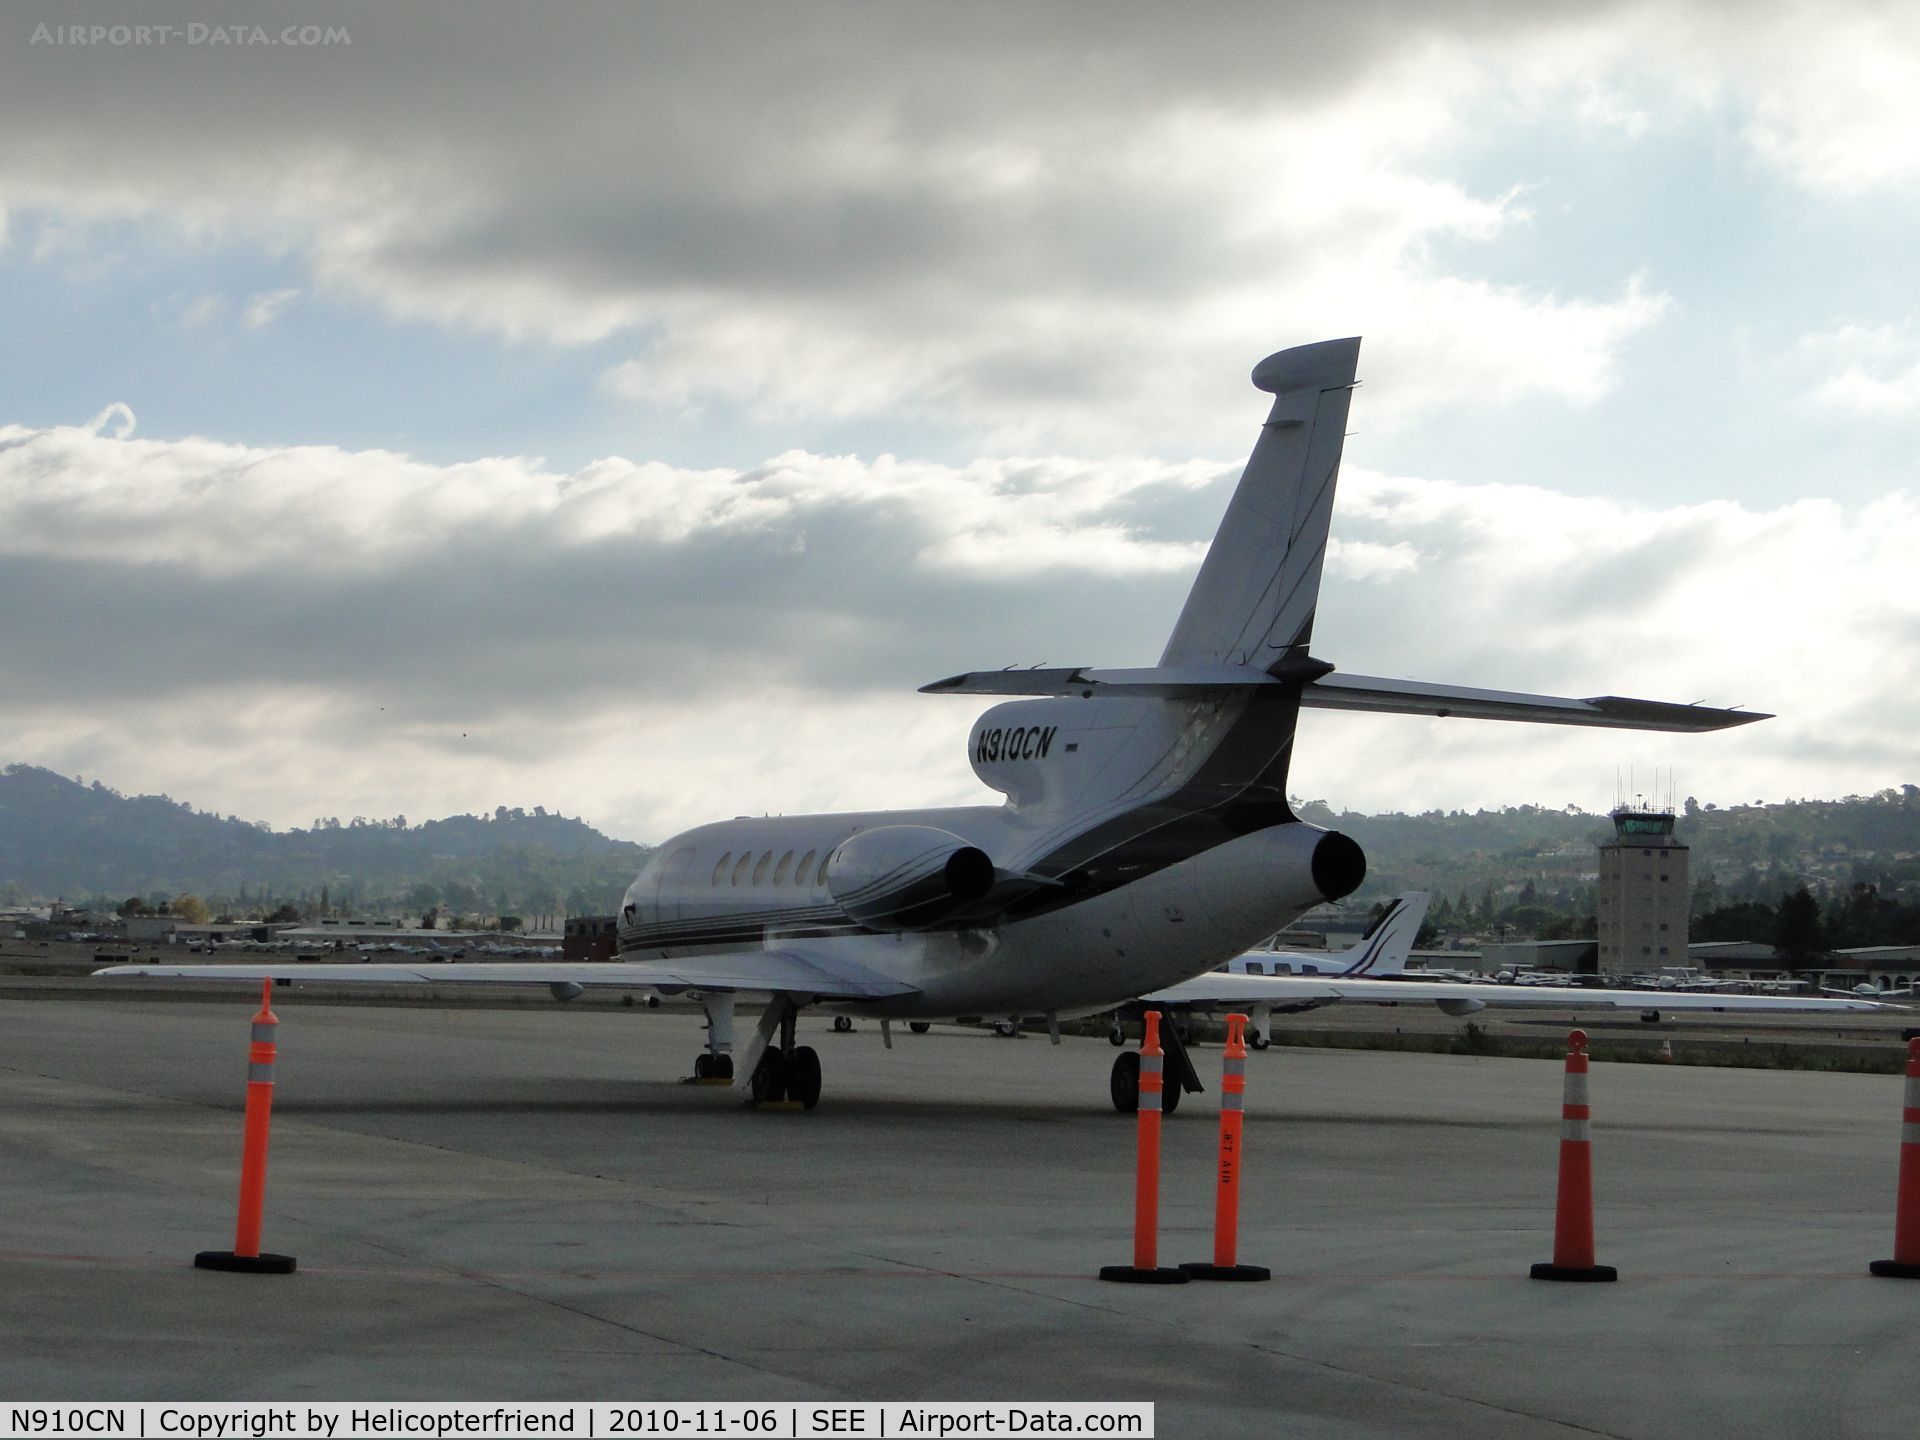 N910CN, 1981 Dassault Falcon 50 C/N 59, Just been re-fueled and parked on the side of Jet Air hangers